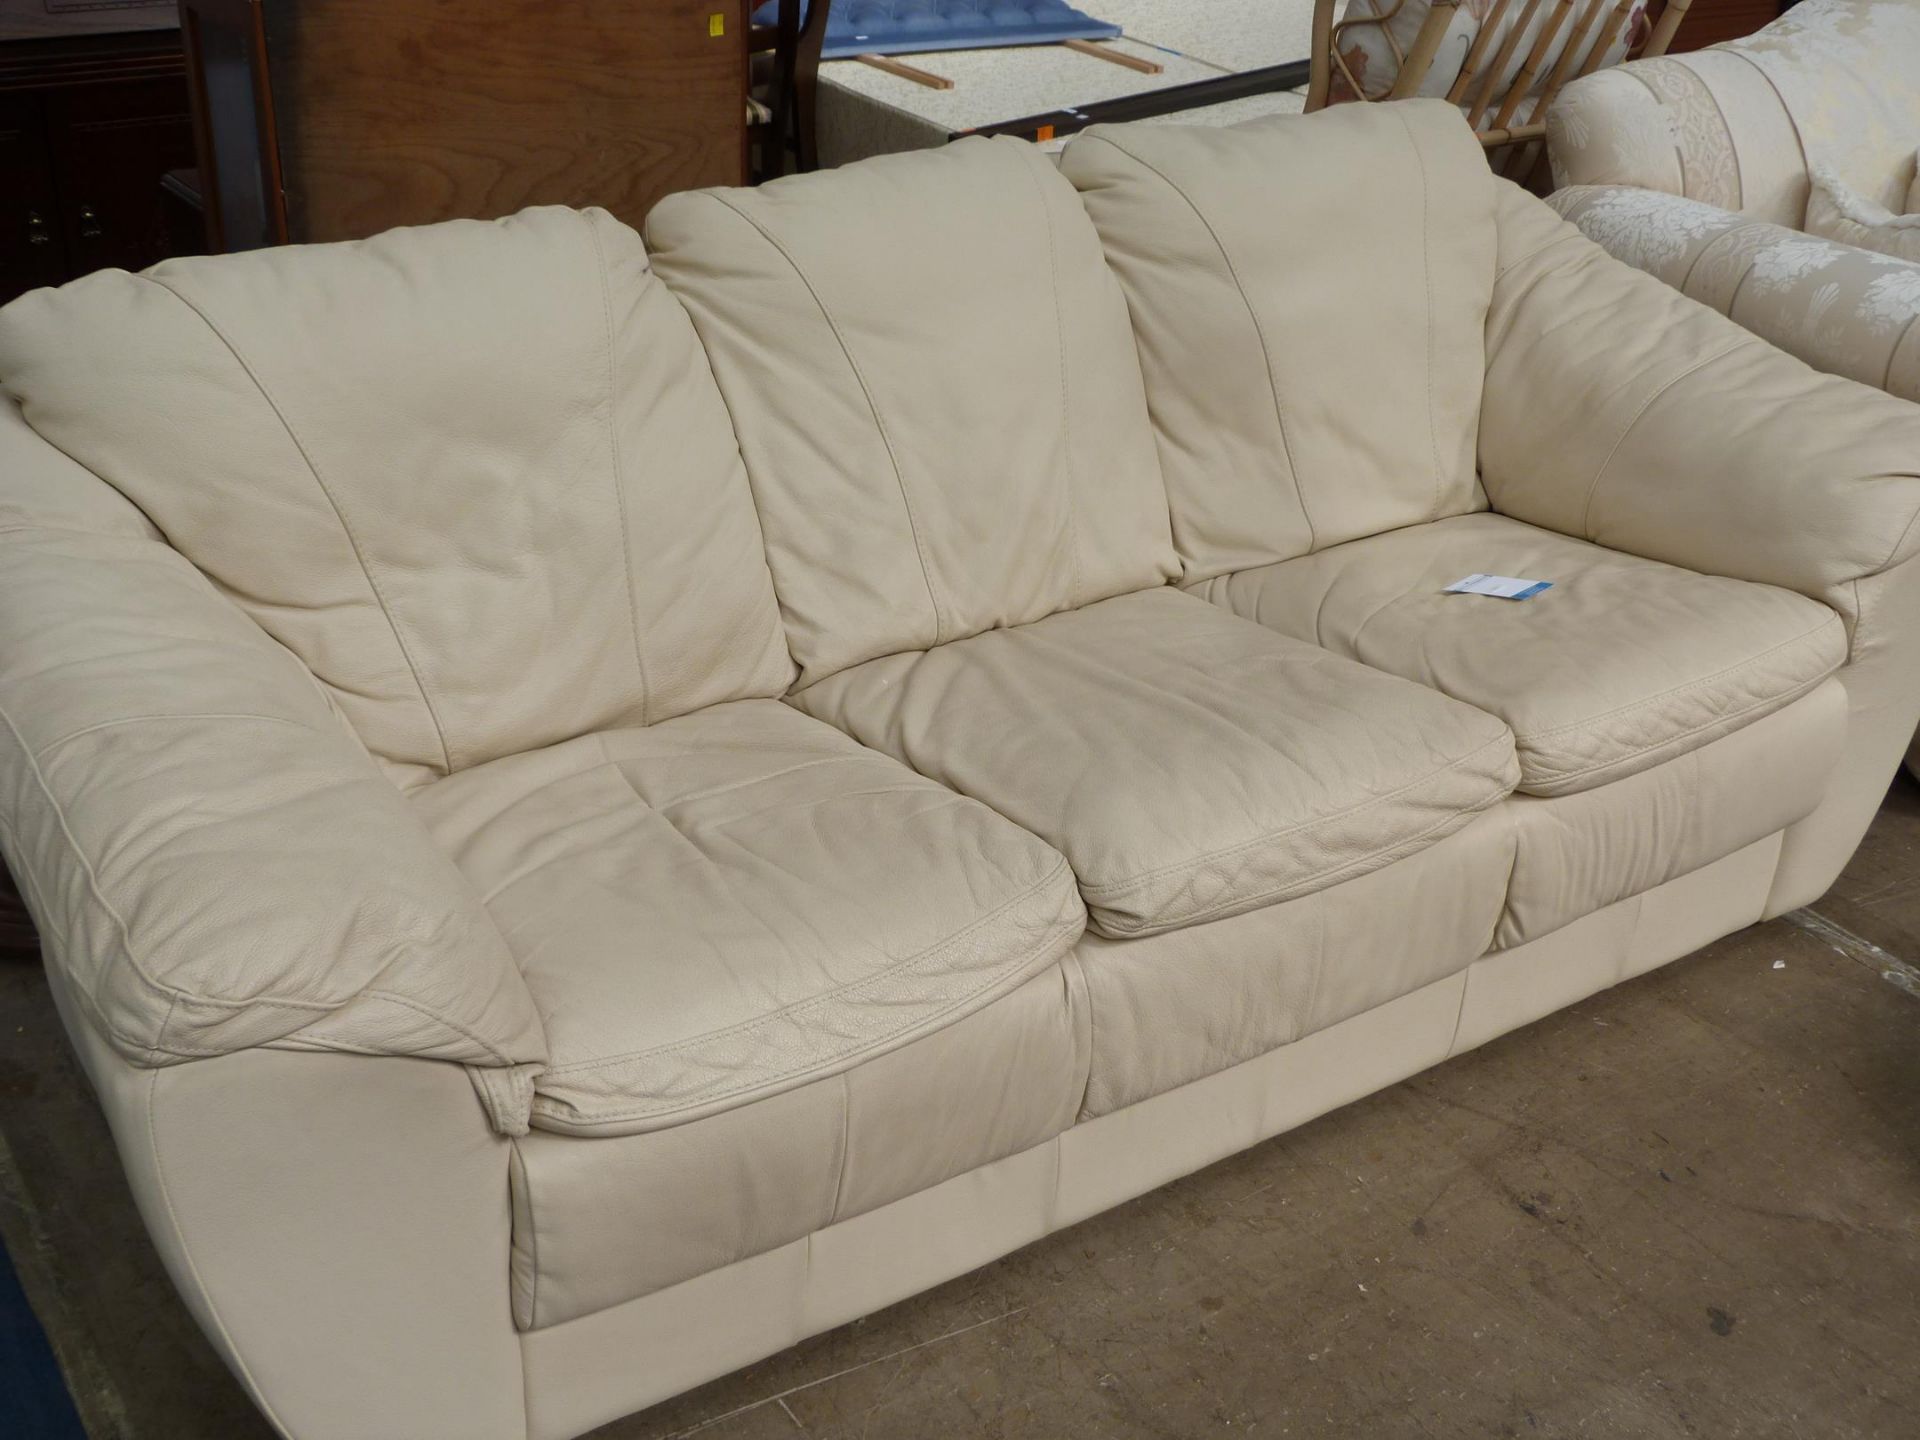 An off white three seat Leather Settee (est £25-£50)